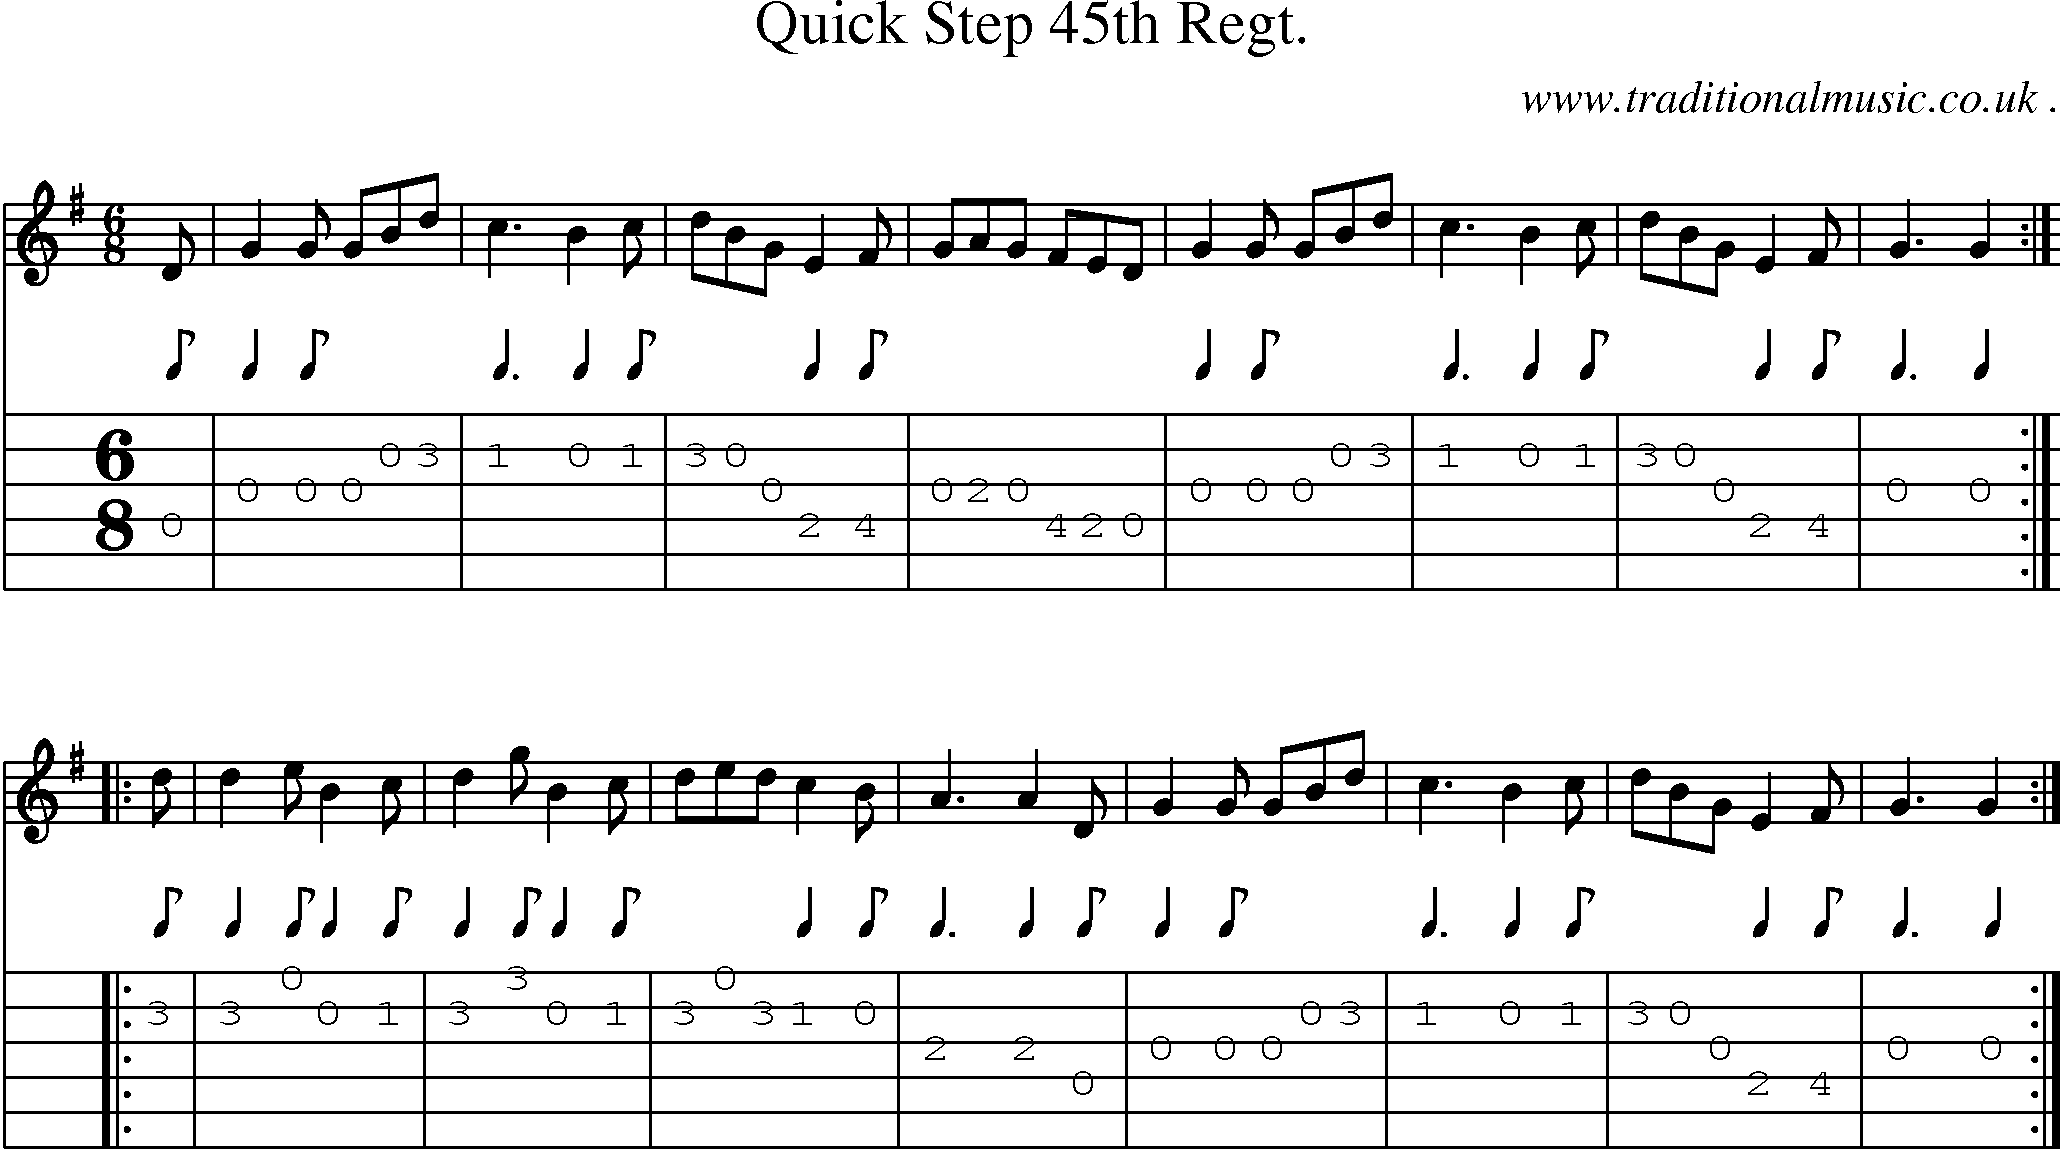 Sheet-Music and Guitar Tabs for Quick Step 45th Regt